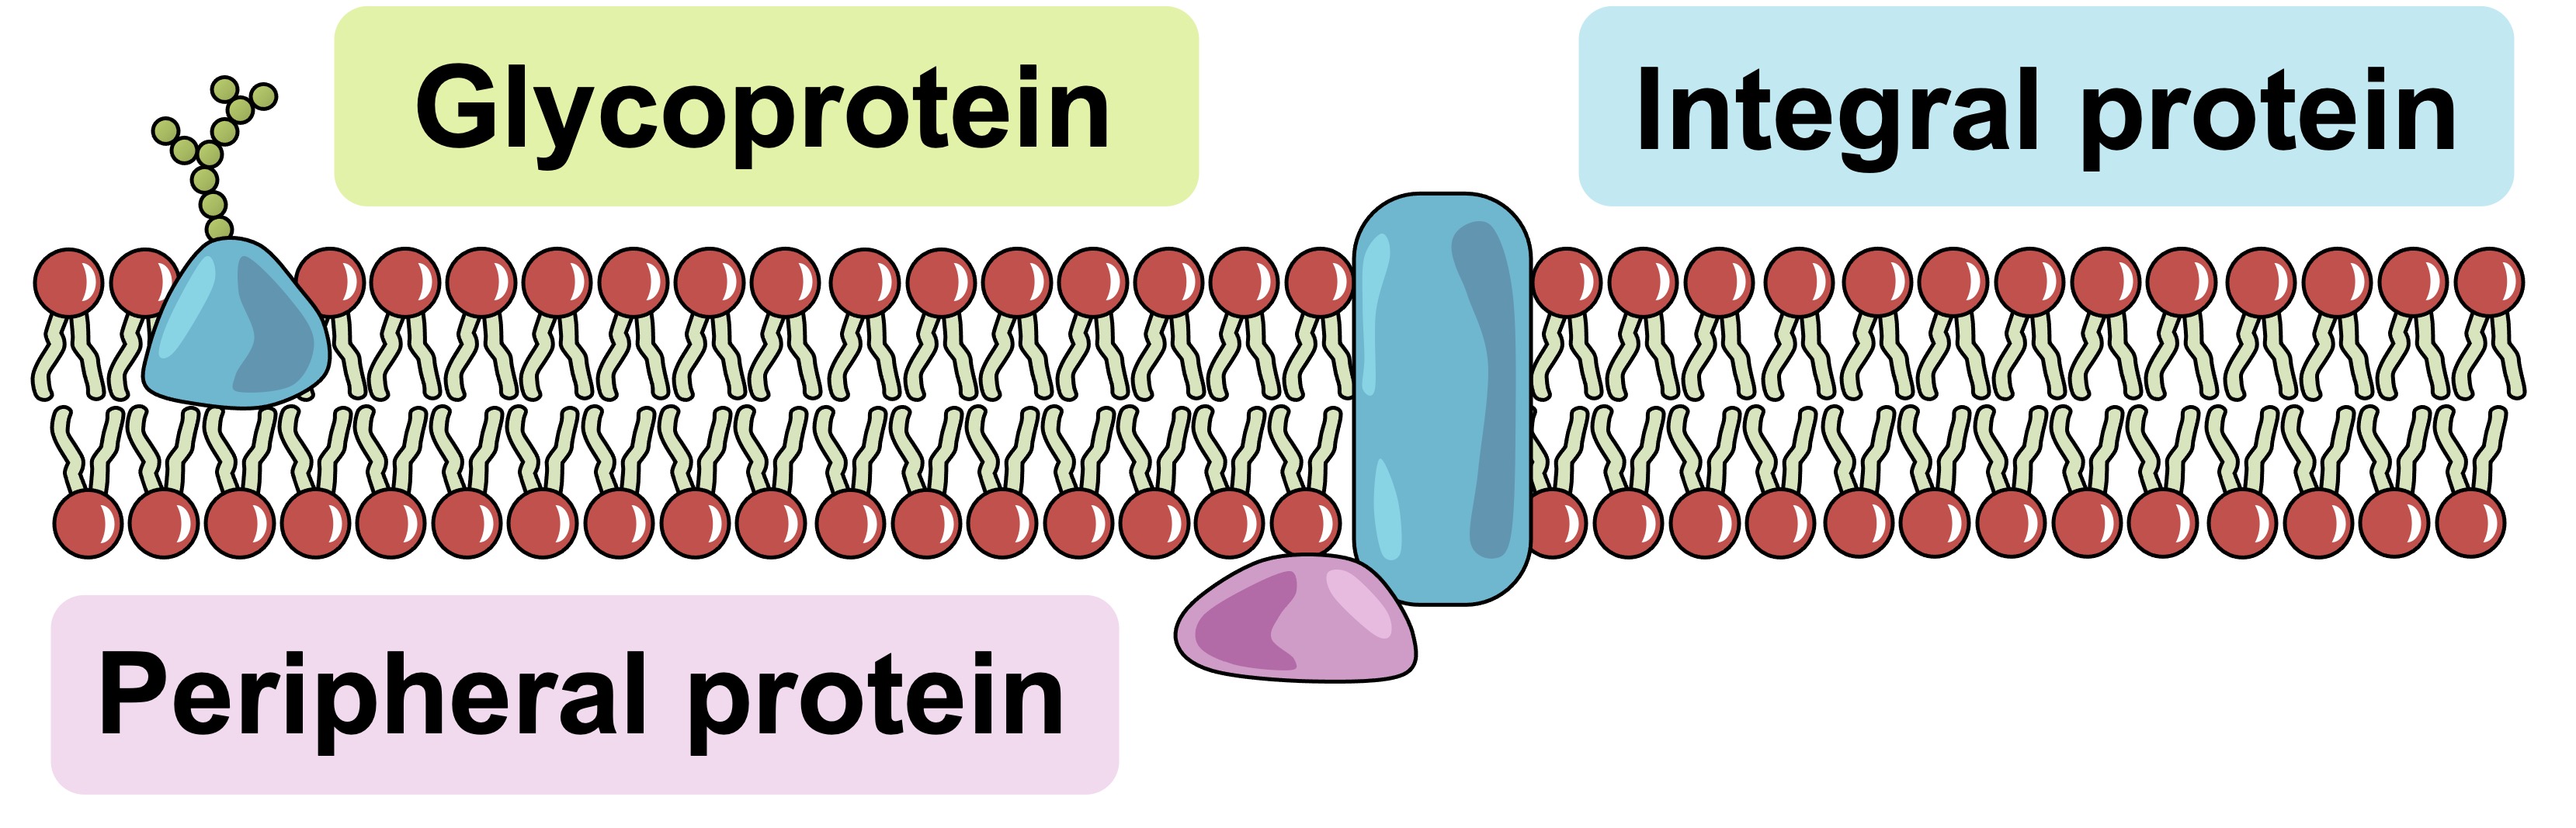 <p>Glycoprotein</p>